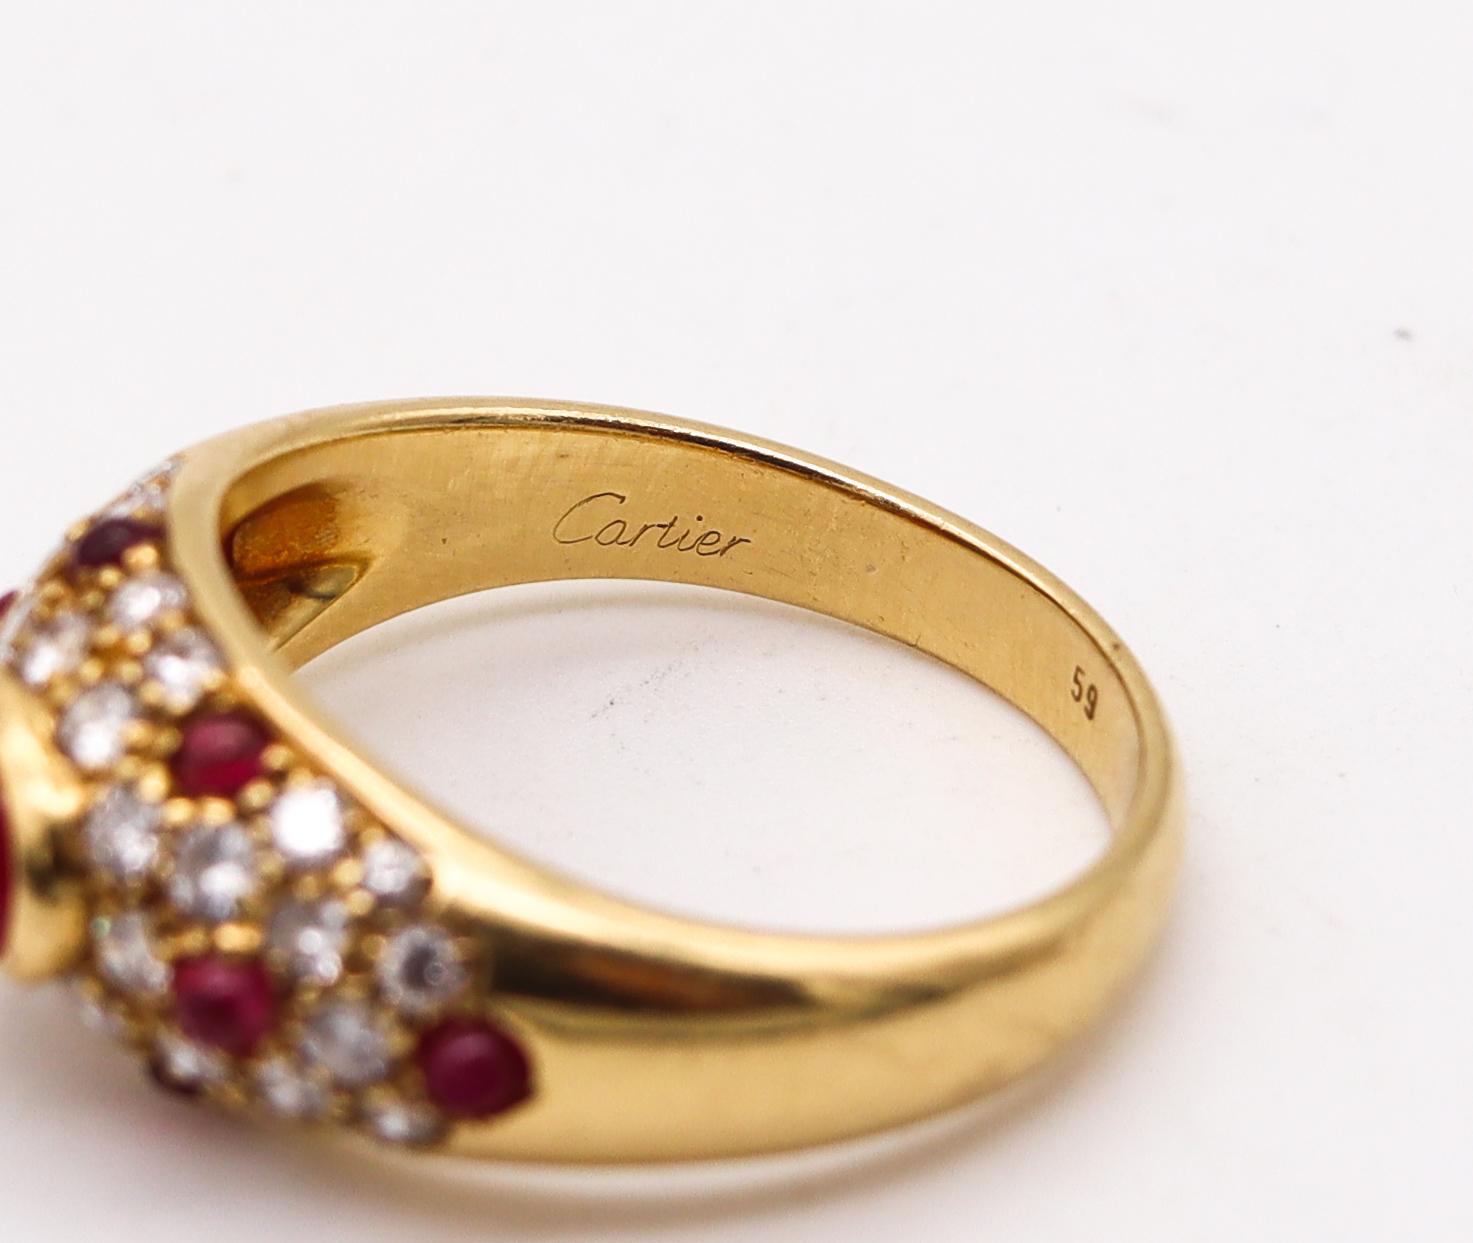 Modernist Cartier Paris 1970 Corinth Ring in 18kt Gold with 2.83ctw in Diamonds & Rubies For Sale